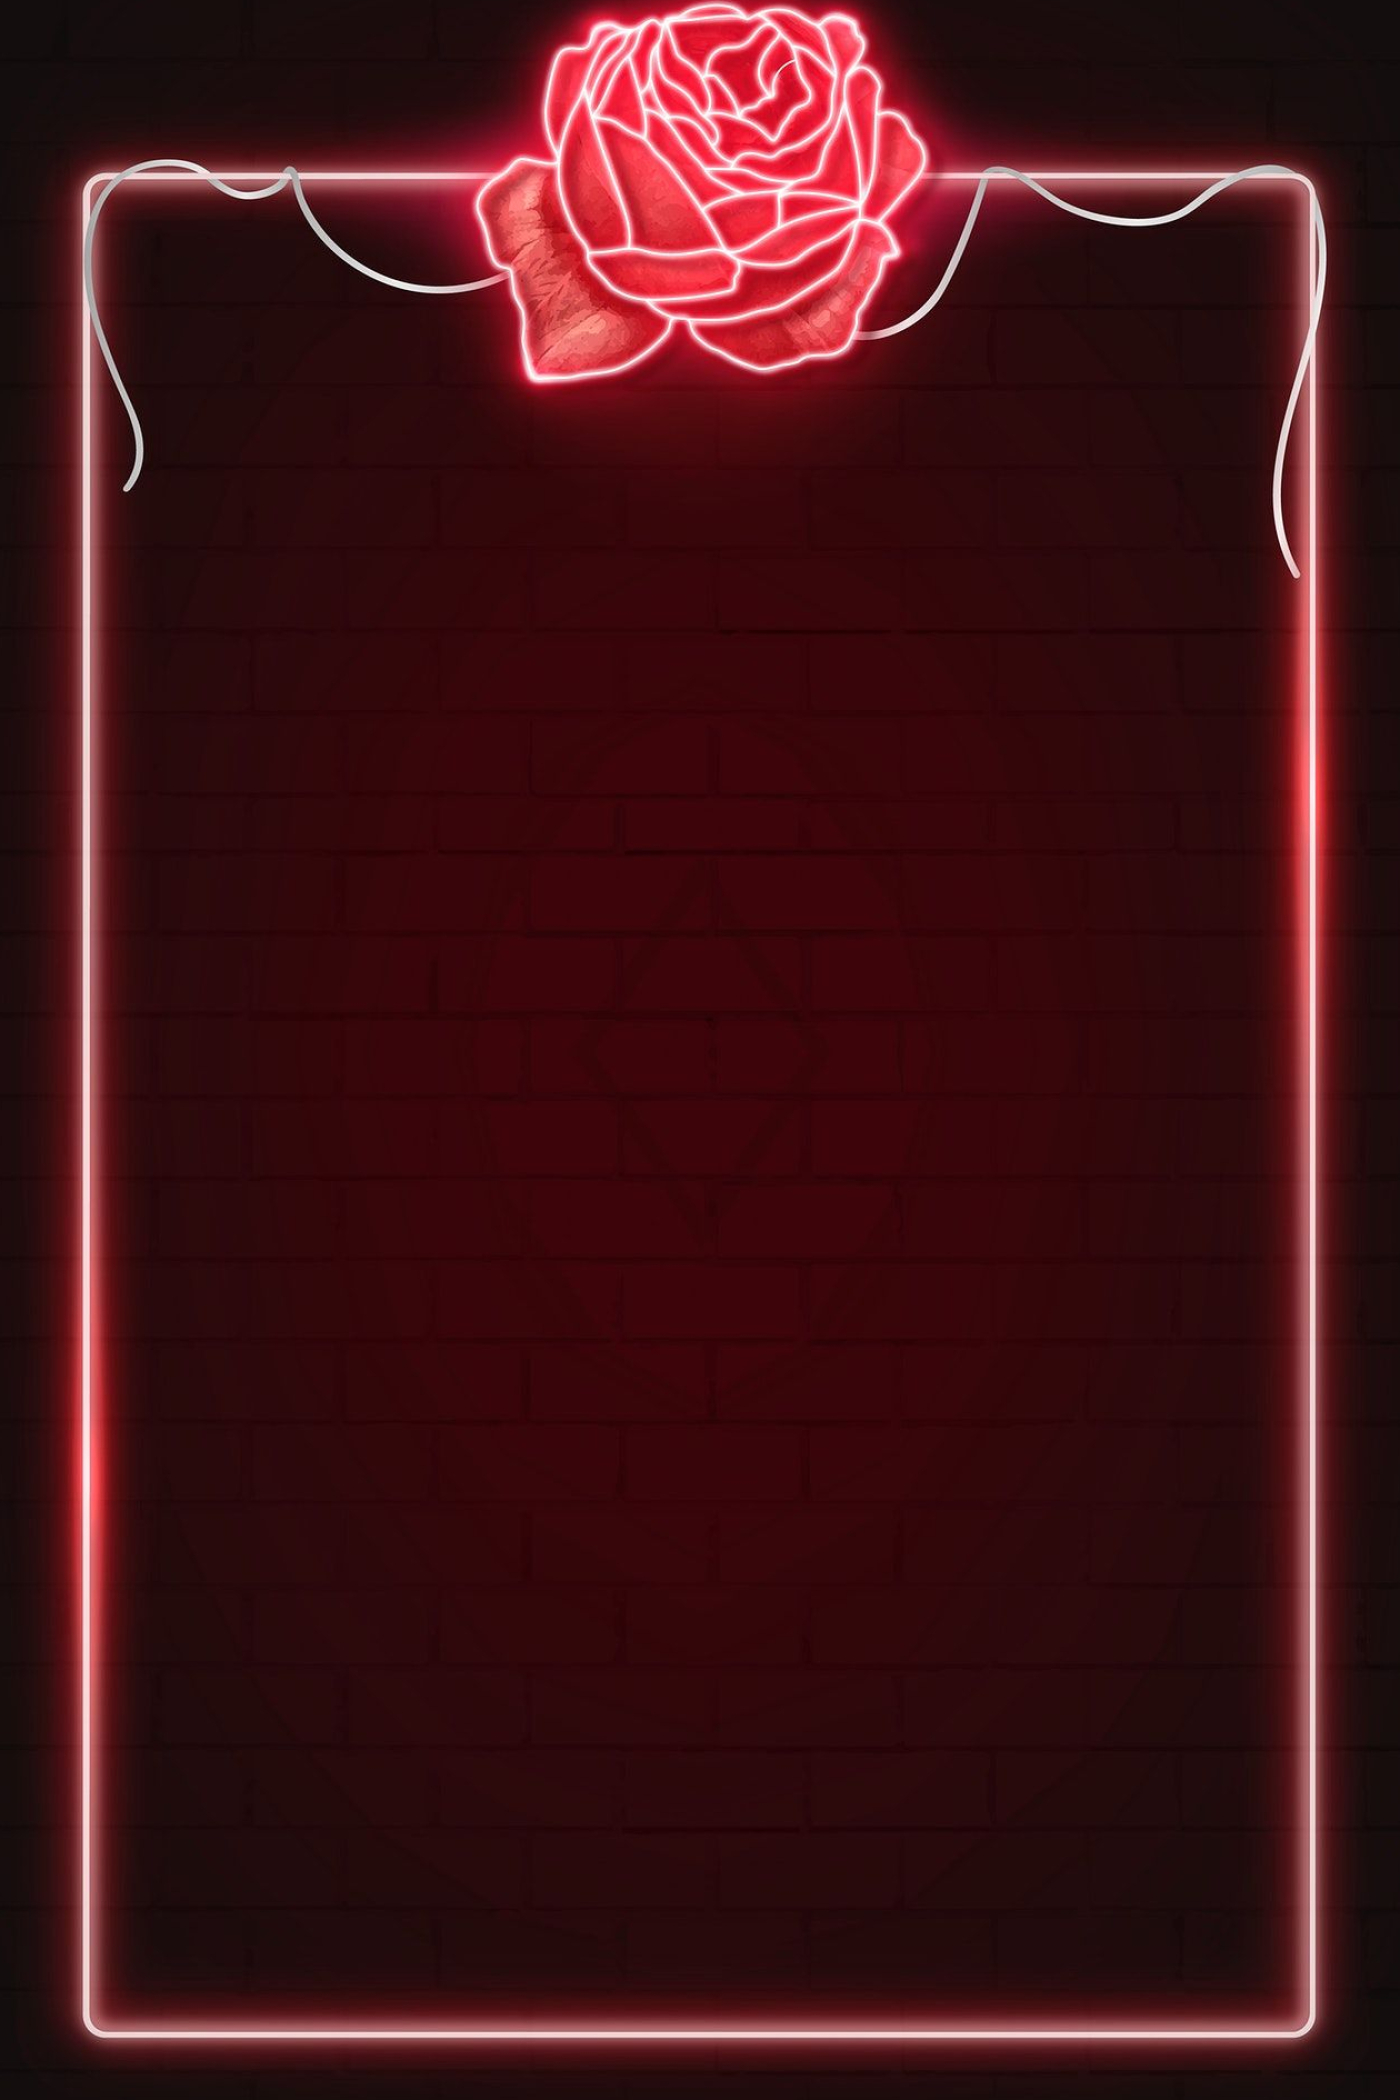 1400x2100 Download premium vector of Red neon rectangle frame vector by marinemynt about red rose, neon red, neon rose, &acirc;&#128;&brvbar; | Neon wallpaper, Photo frame wallpaper, Rose frame